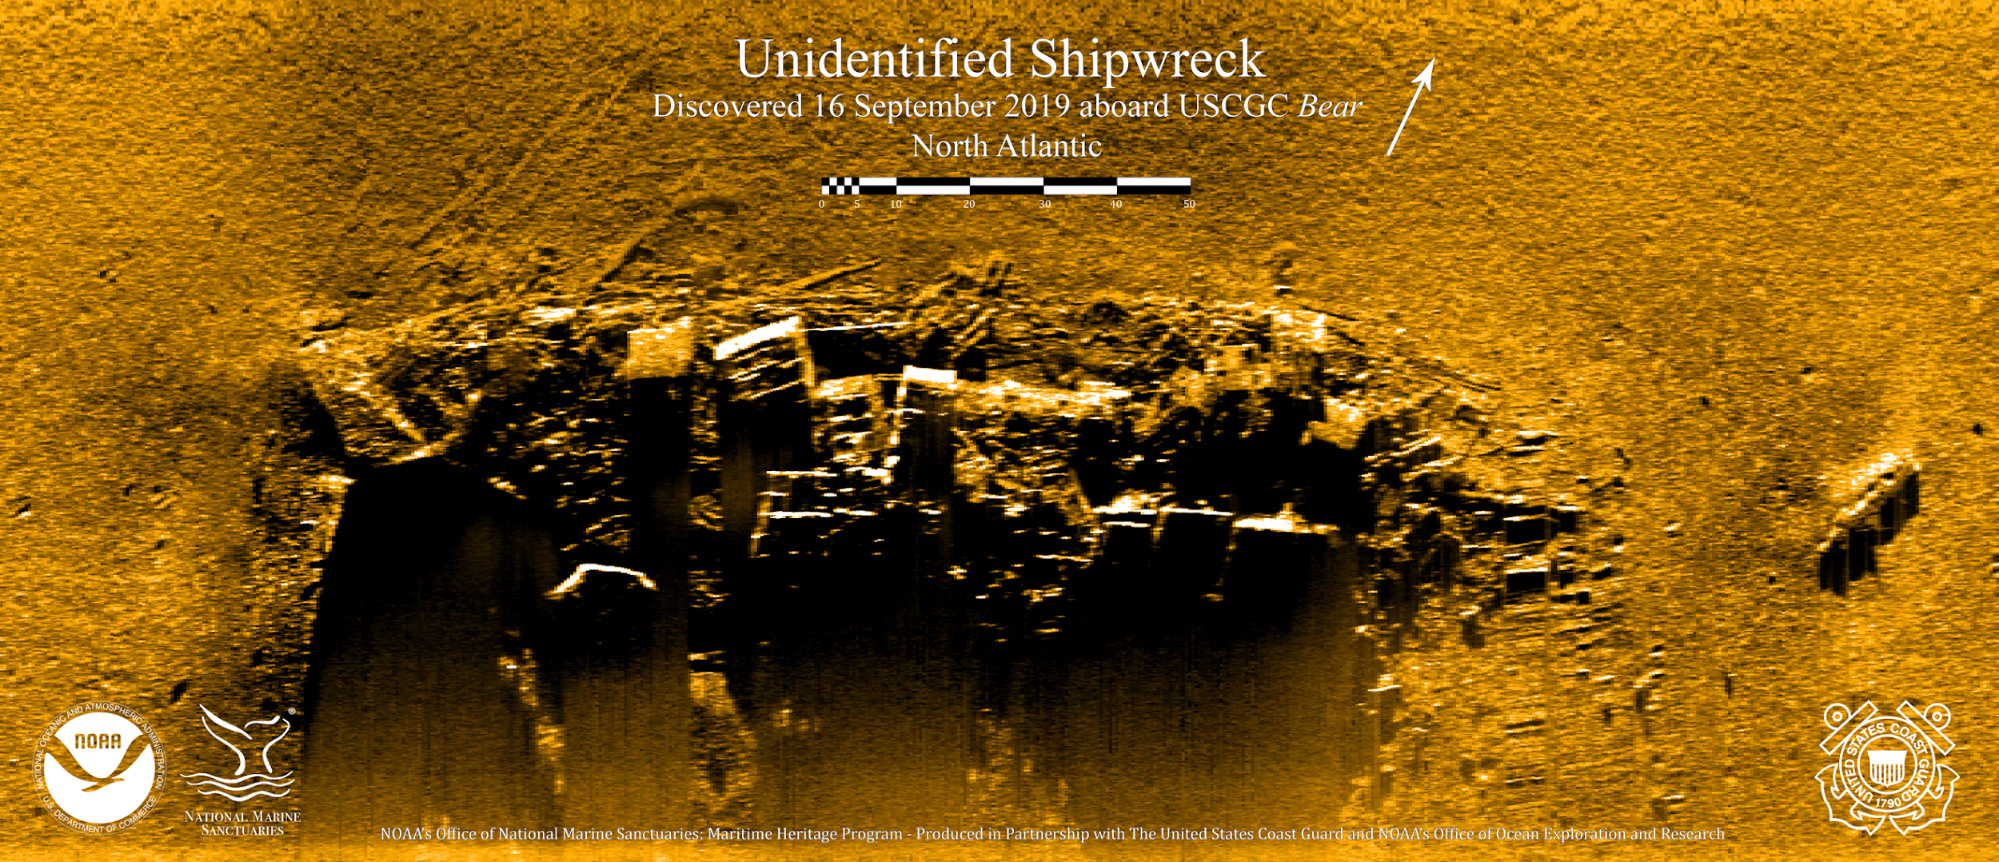 Side scan sonar image of a shipwreck that NOAA and Coast Guard researchers later determined to be the USRC Bear.